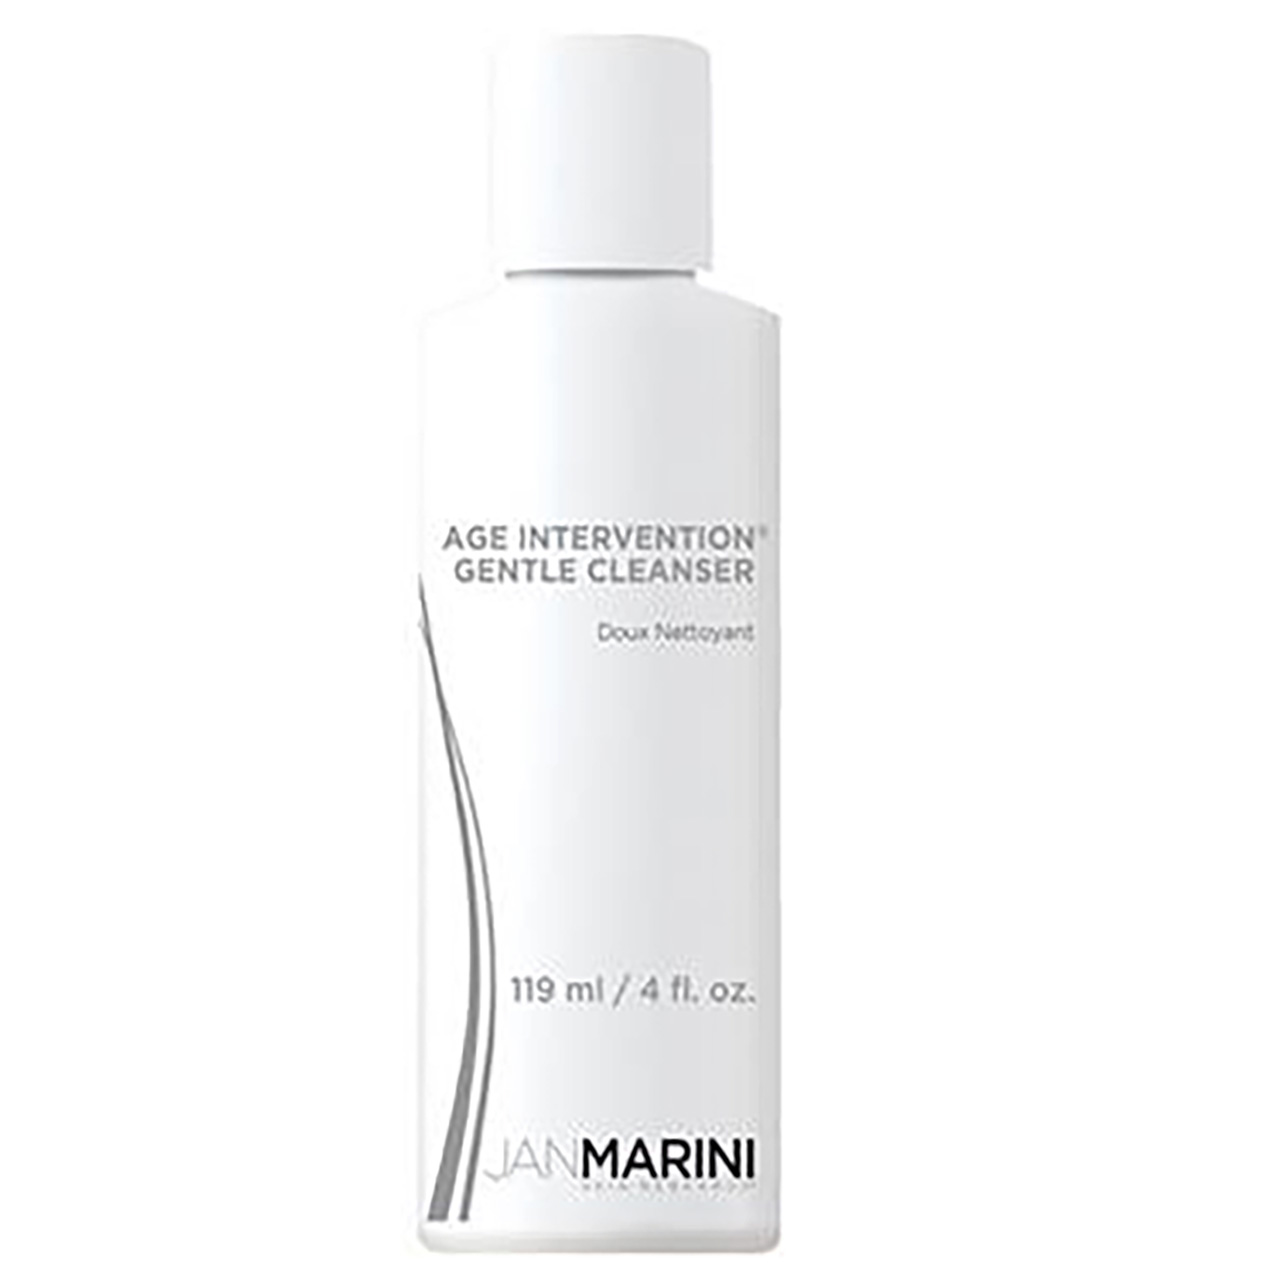 You are replacing the MD Formulations sensitive skin cleanser with this? I don't see glycolic acit among its ingredients. Please explain. Thank you.